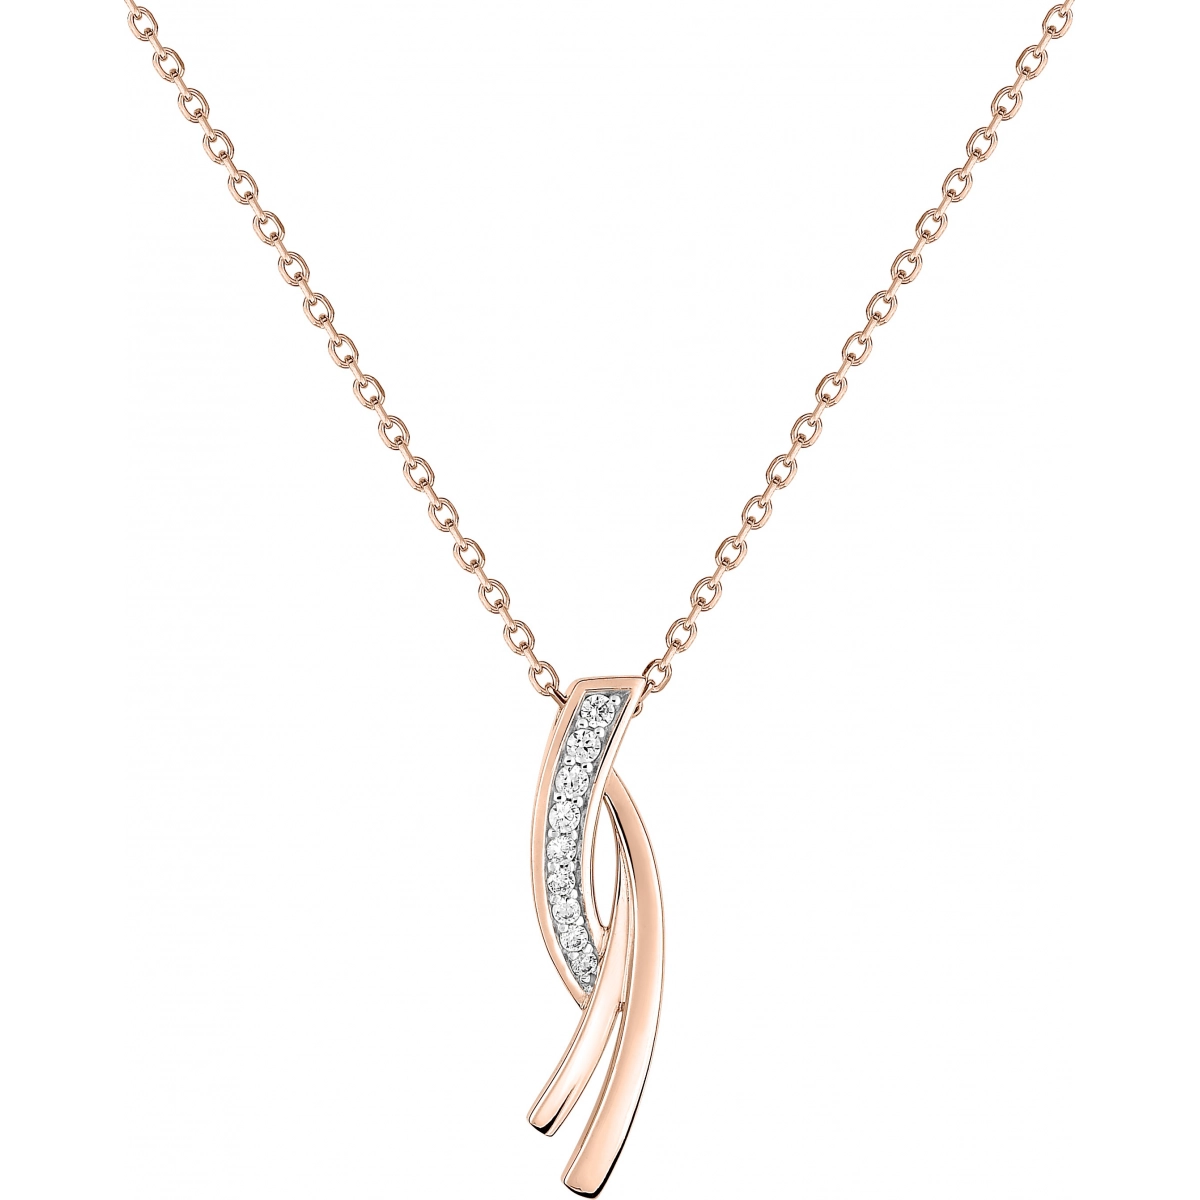 Necklace w. cz gold plated Brass PG - Size: 42  Lua Blanca  132194.1R.42